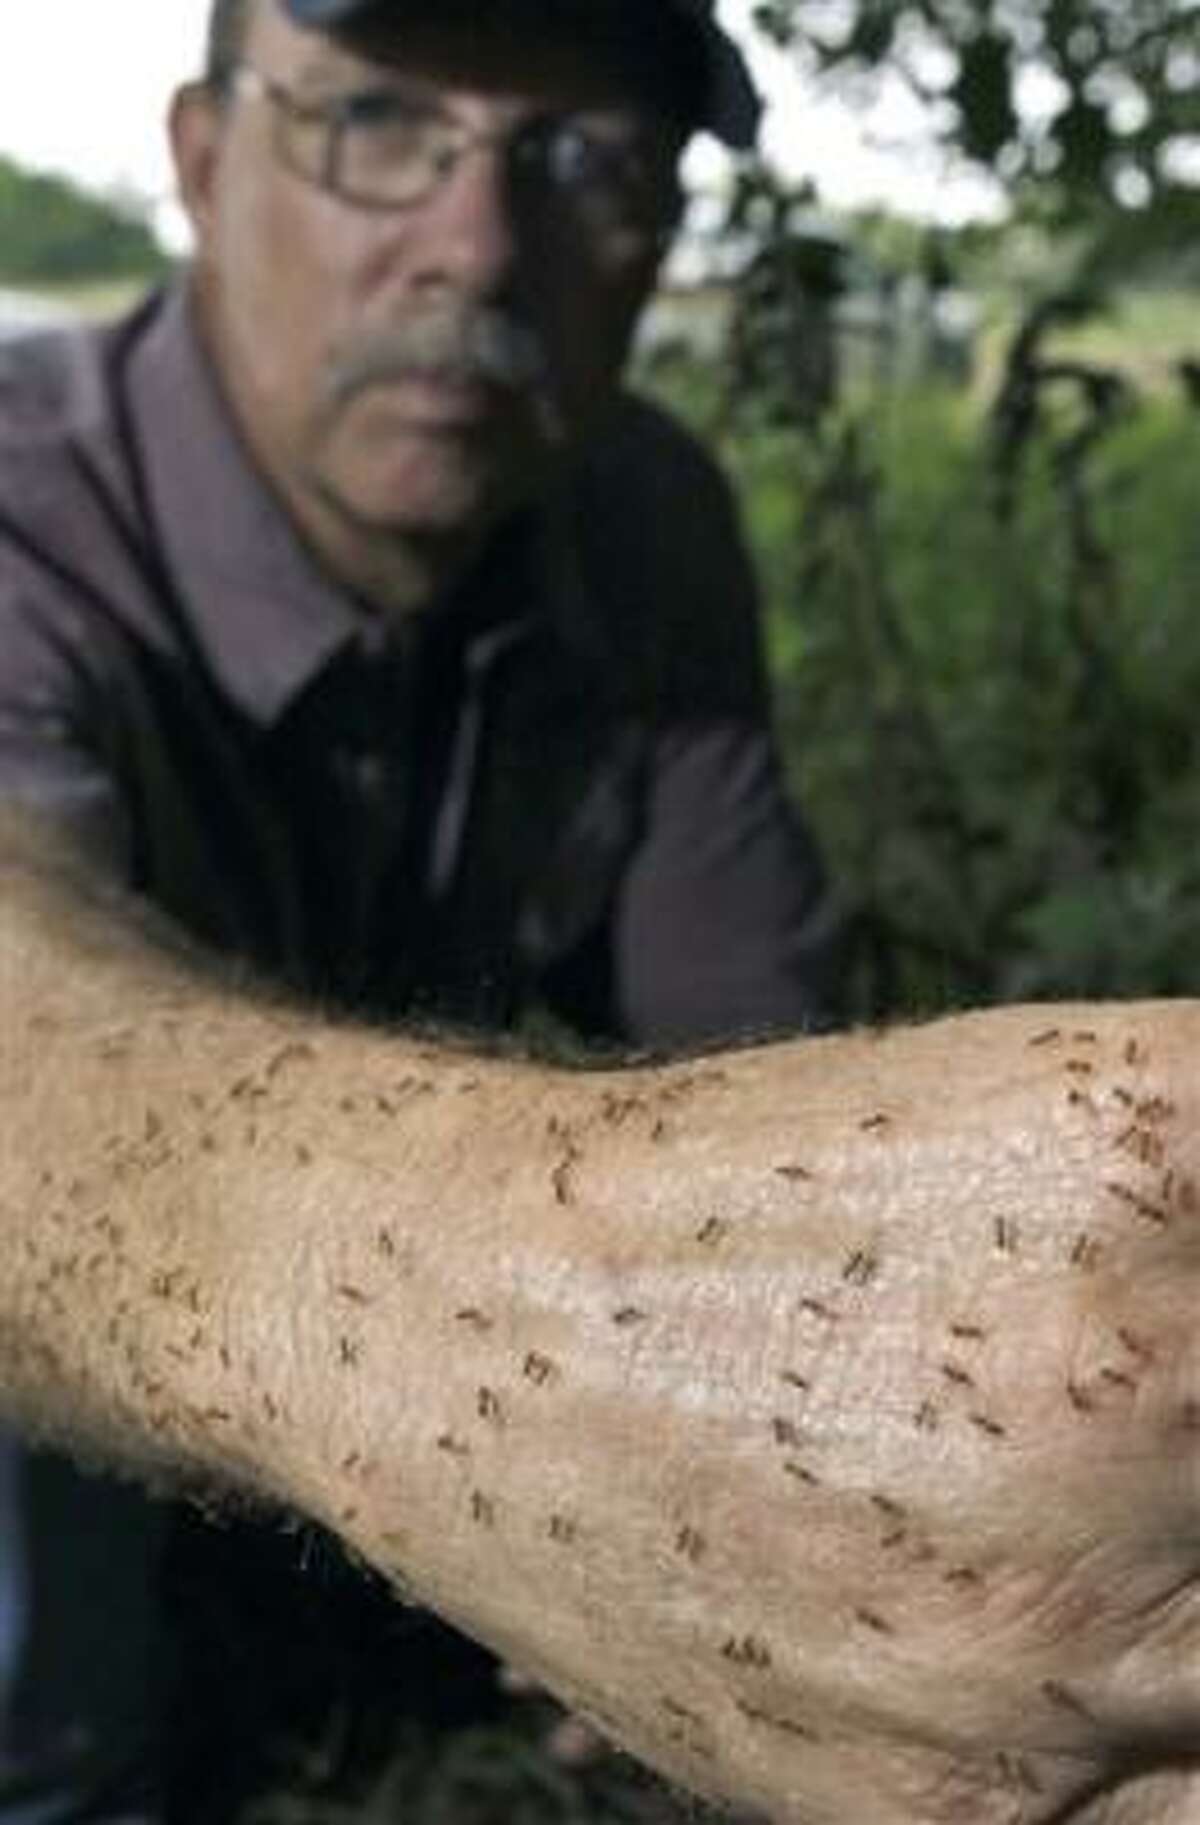 Tom Rasberry, an exterminator, lets "crazy rasberry ants," named after him, crawl on his arm in Deer Park.